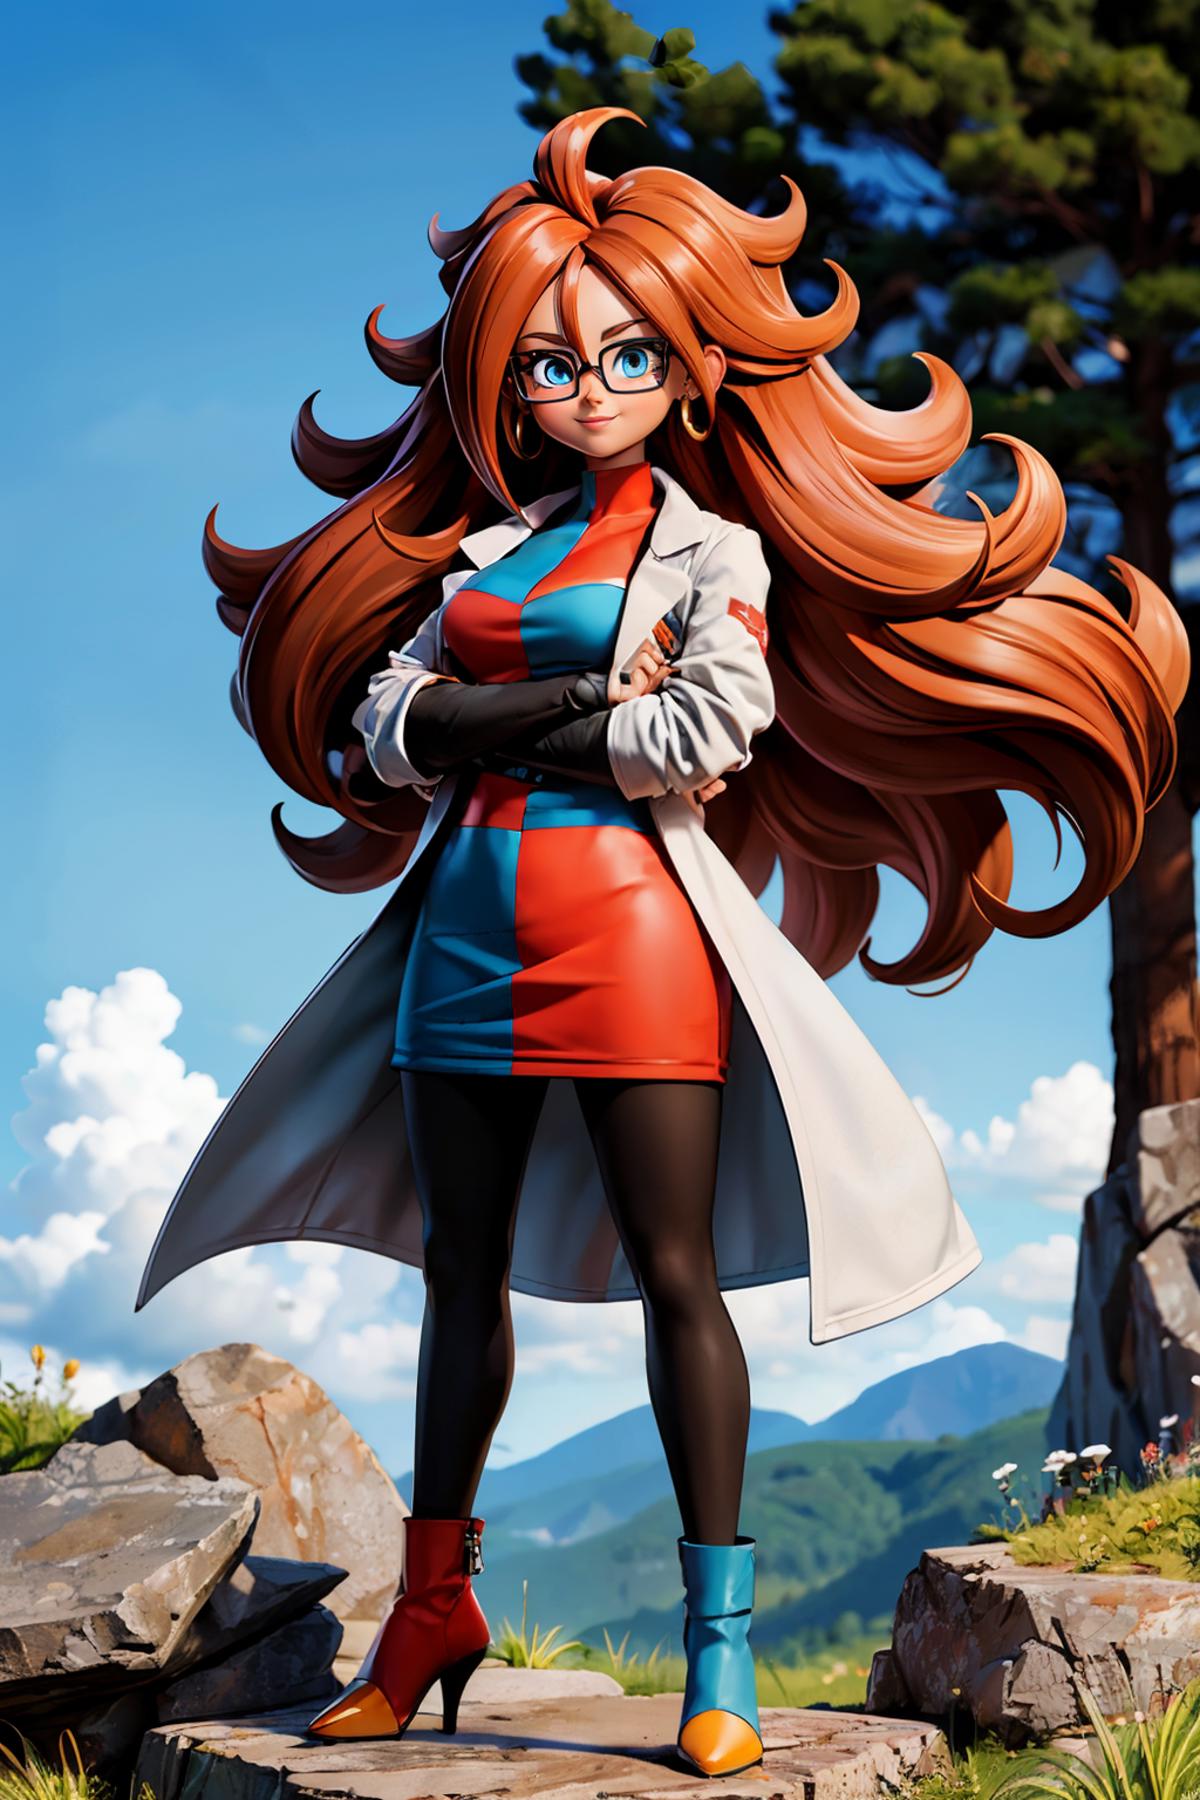 Android 21 (game character) | ownwaifu image by wikkitikki